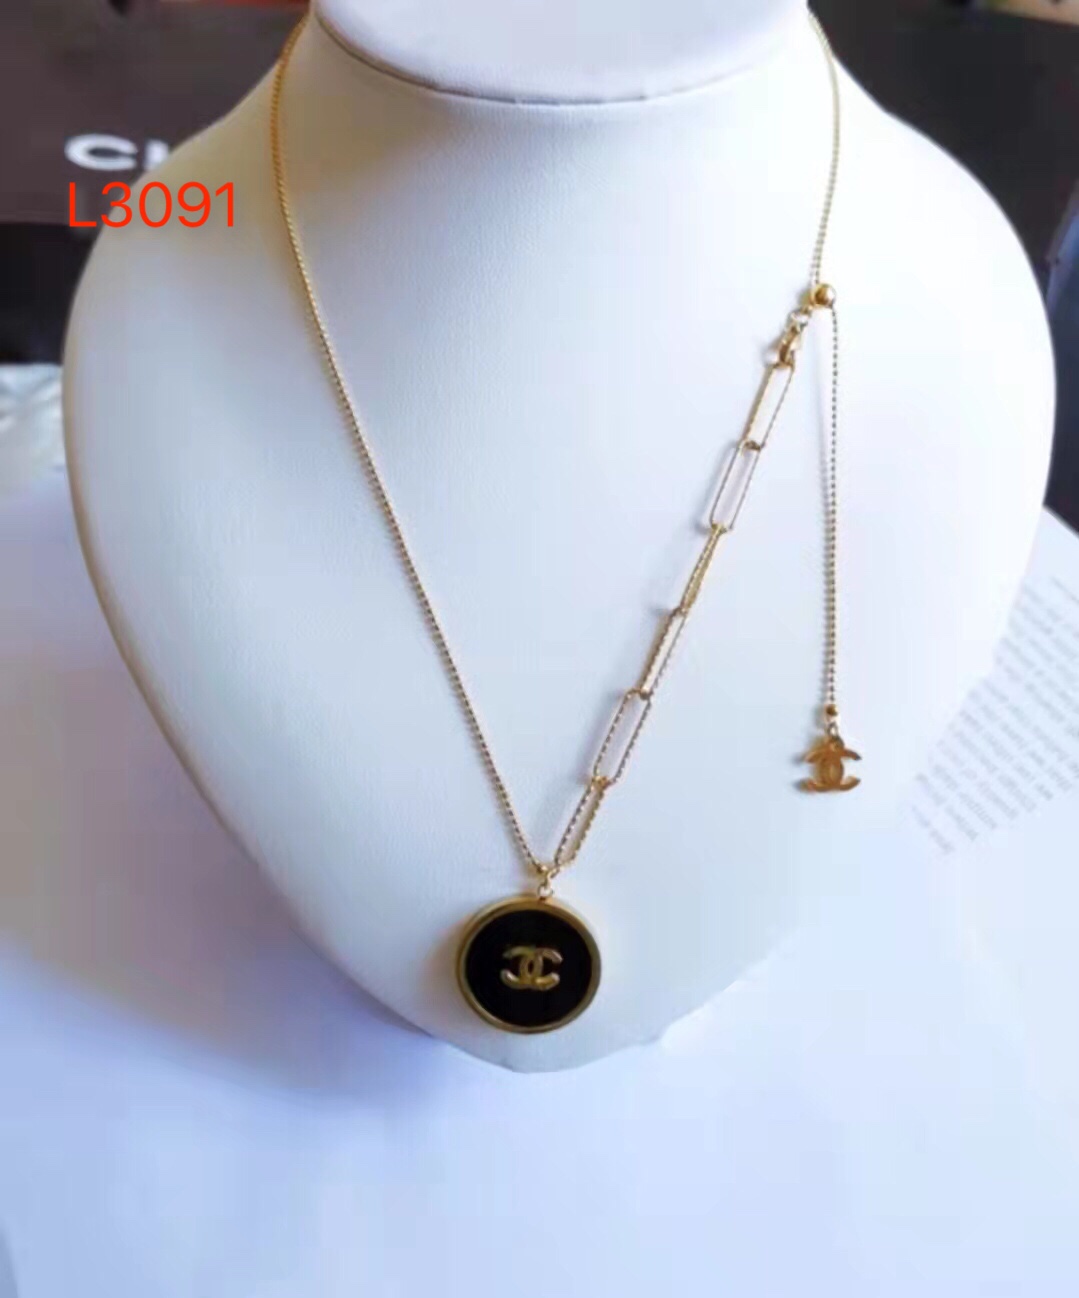 Chanel necklace 108427